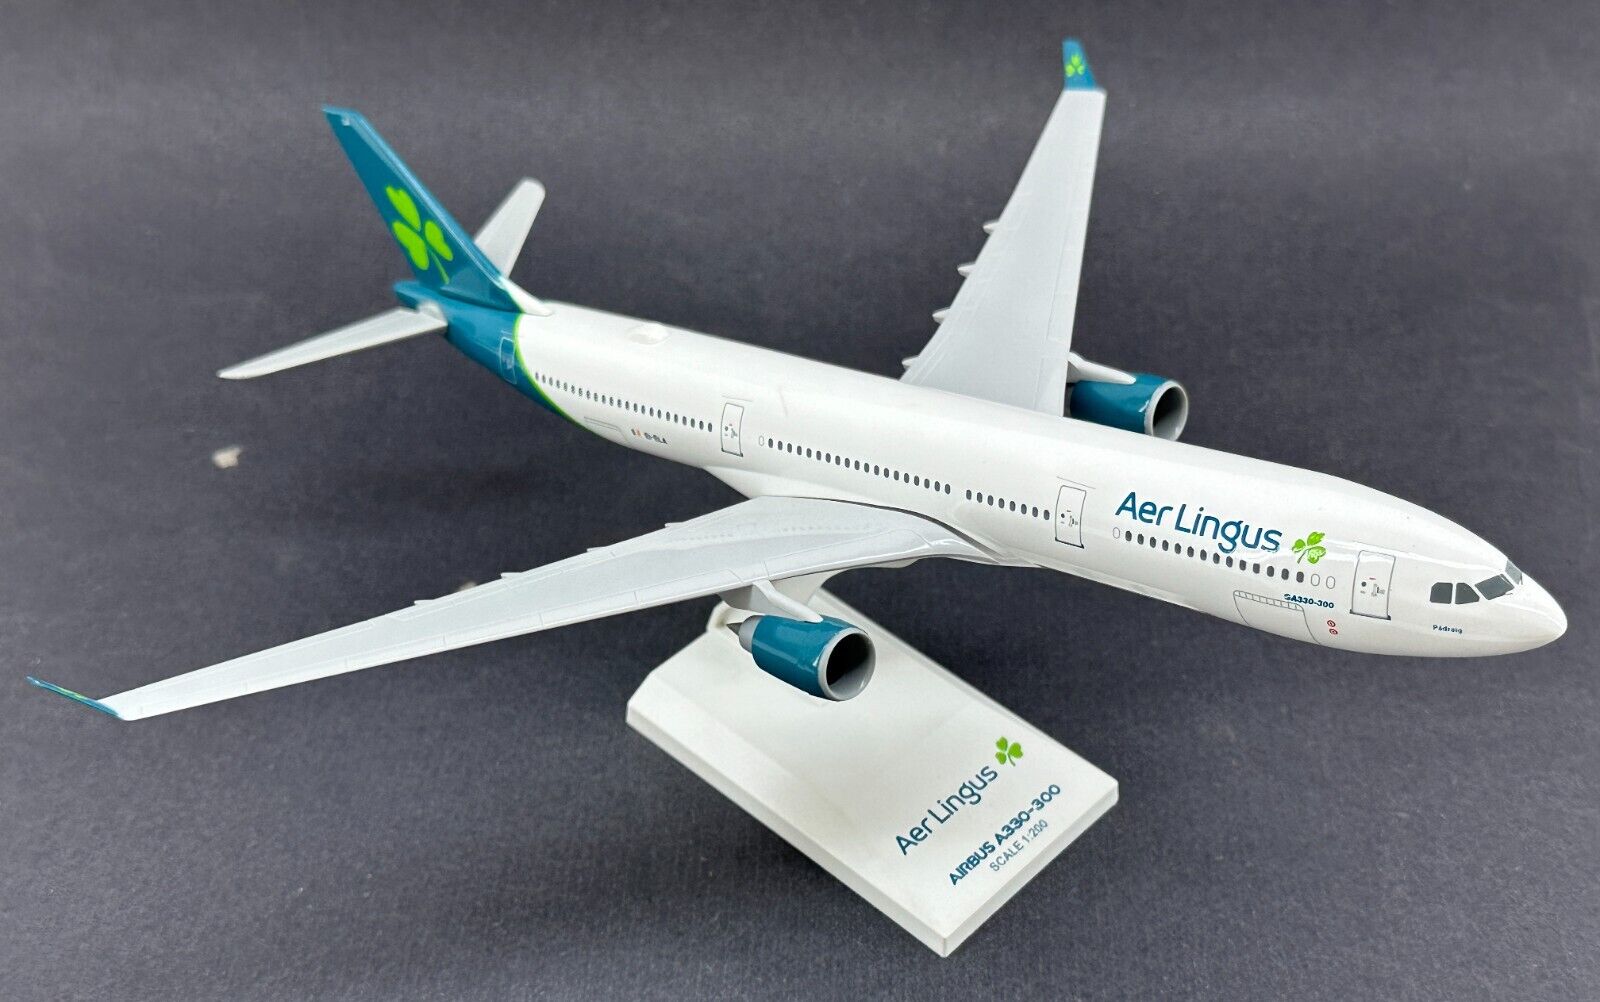 Airplane Model SkyMarks Aer Lingus Airbus A330-300 1:200 Airline Snap Fit